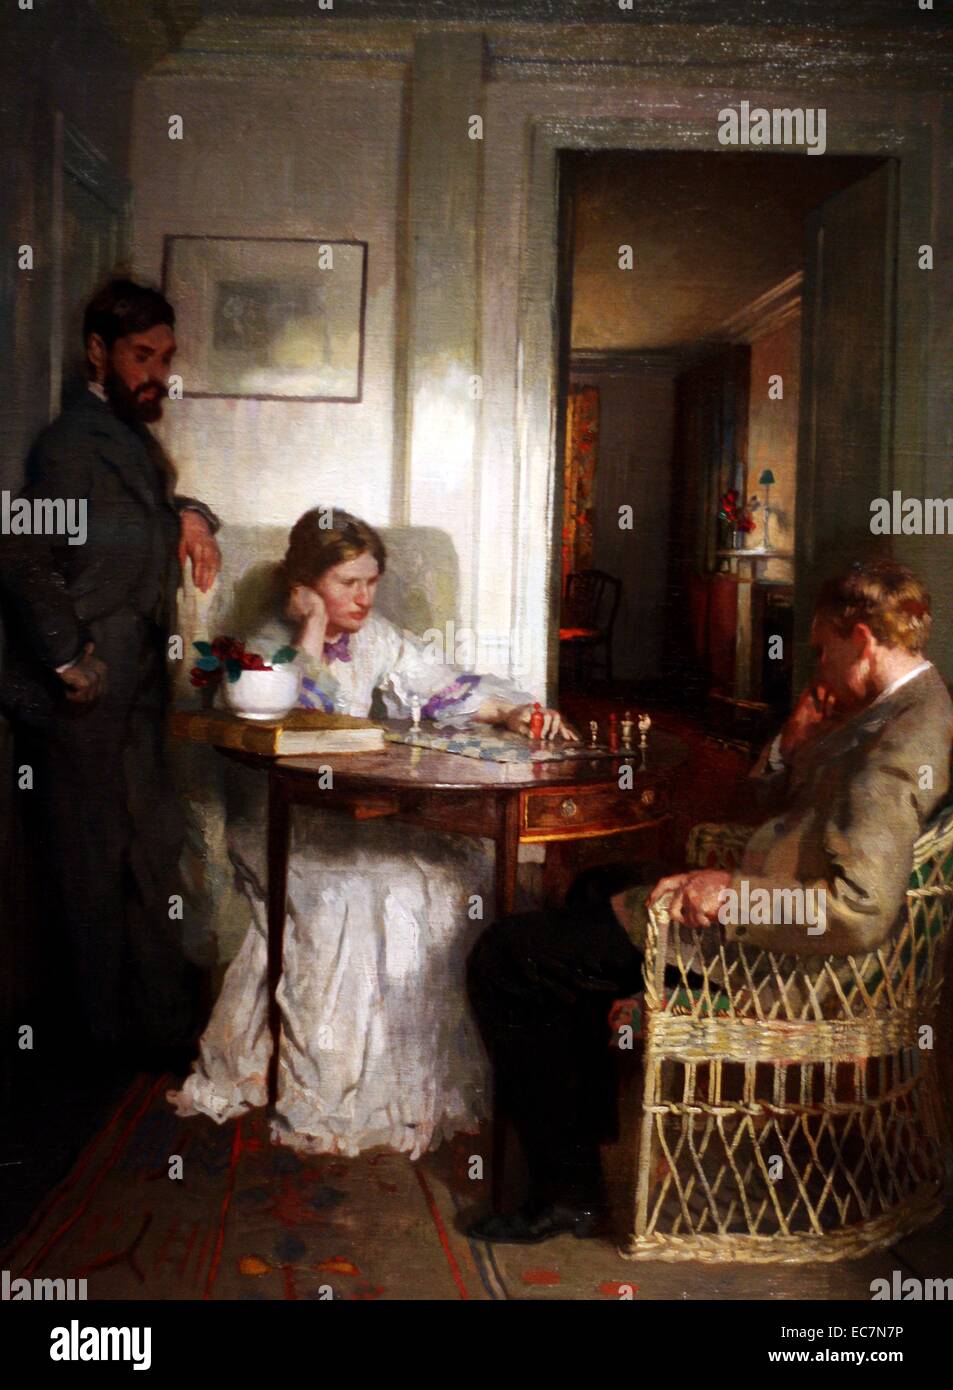 The Chess Player by Sir William Orpen (1878-1931).  This group portrait is one of Orpen's most sophisticated early works.  It includes portraits of the artist's wife (centre) and of Sir Francis Meynell (1891-1975) or his elder brother Everard Meynell (1885-1956).  The third figure may be the artist himself. Stock Photo